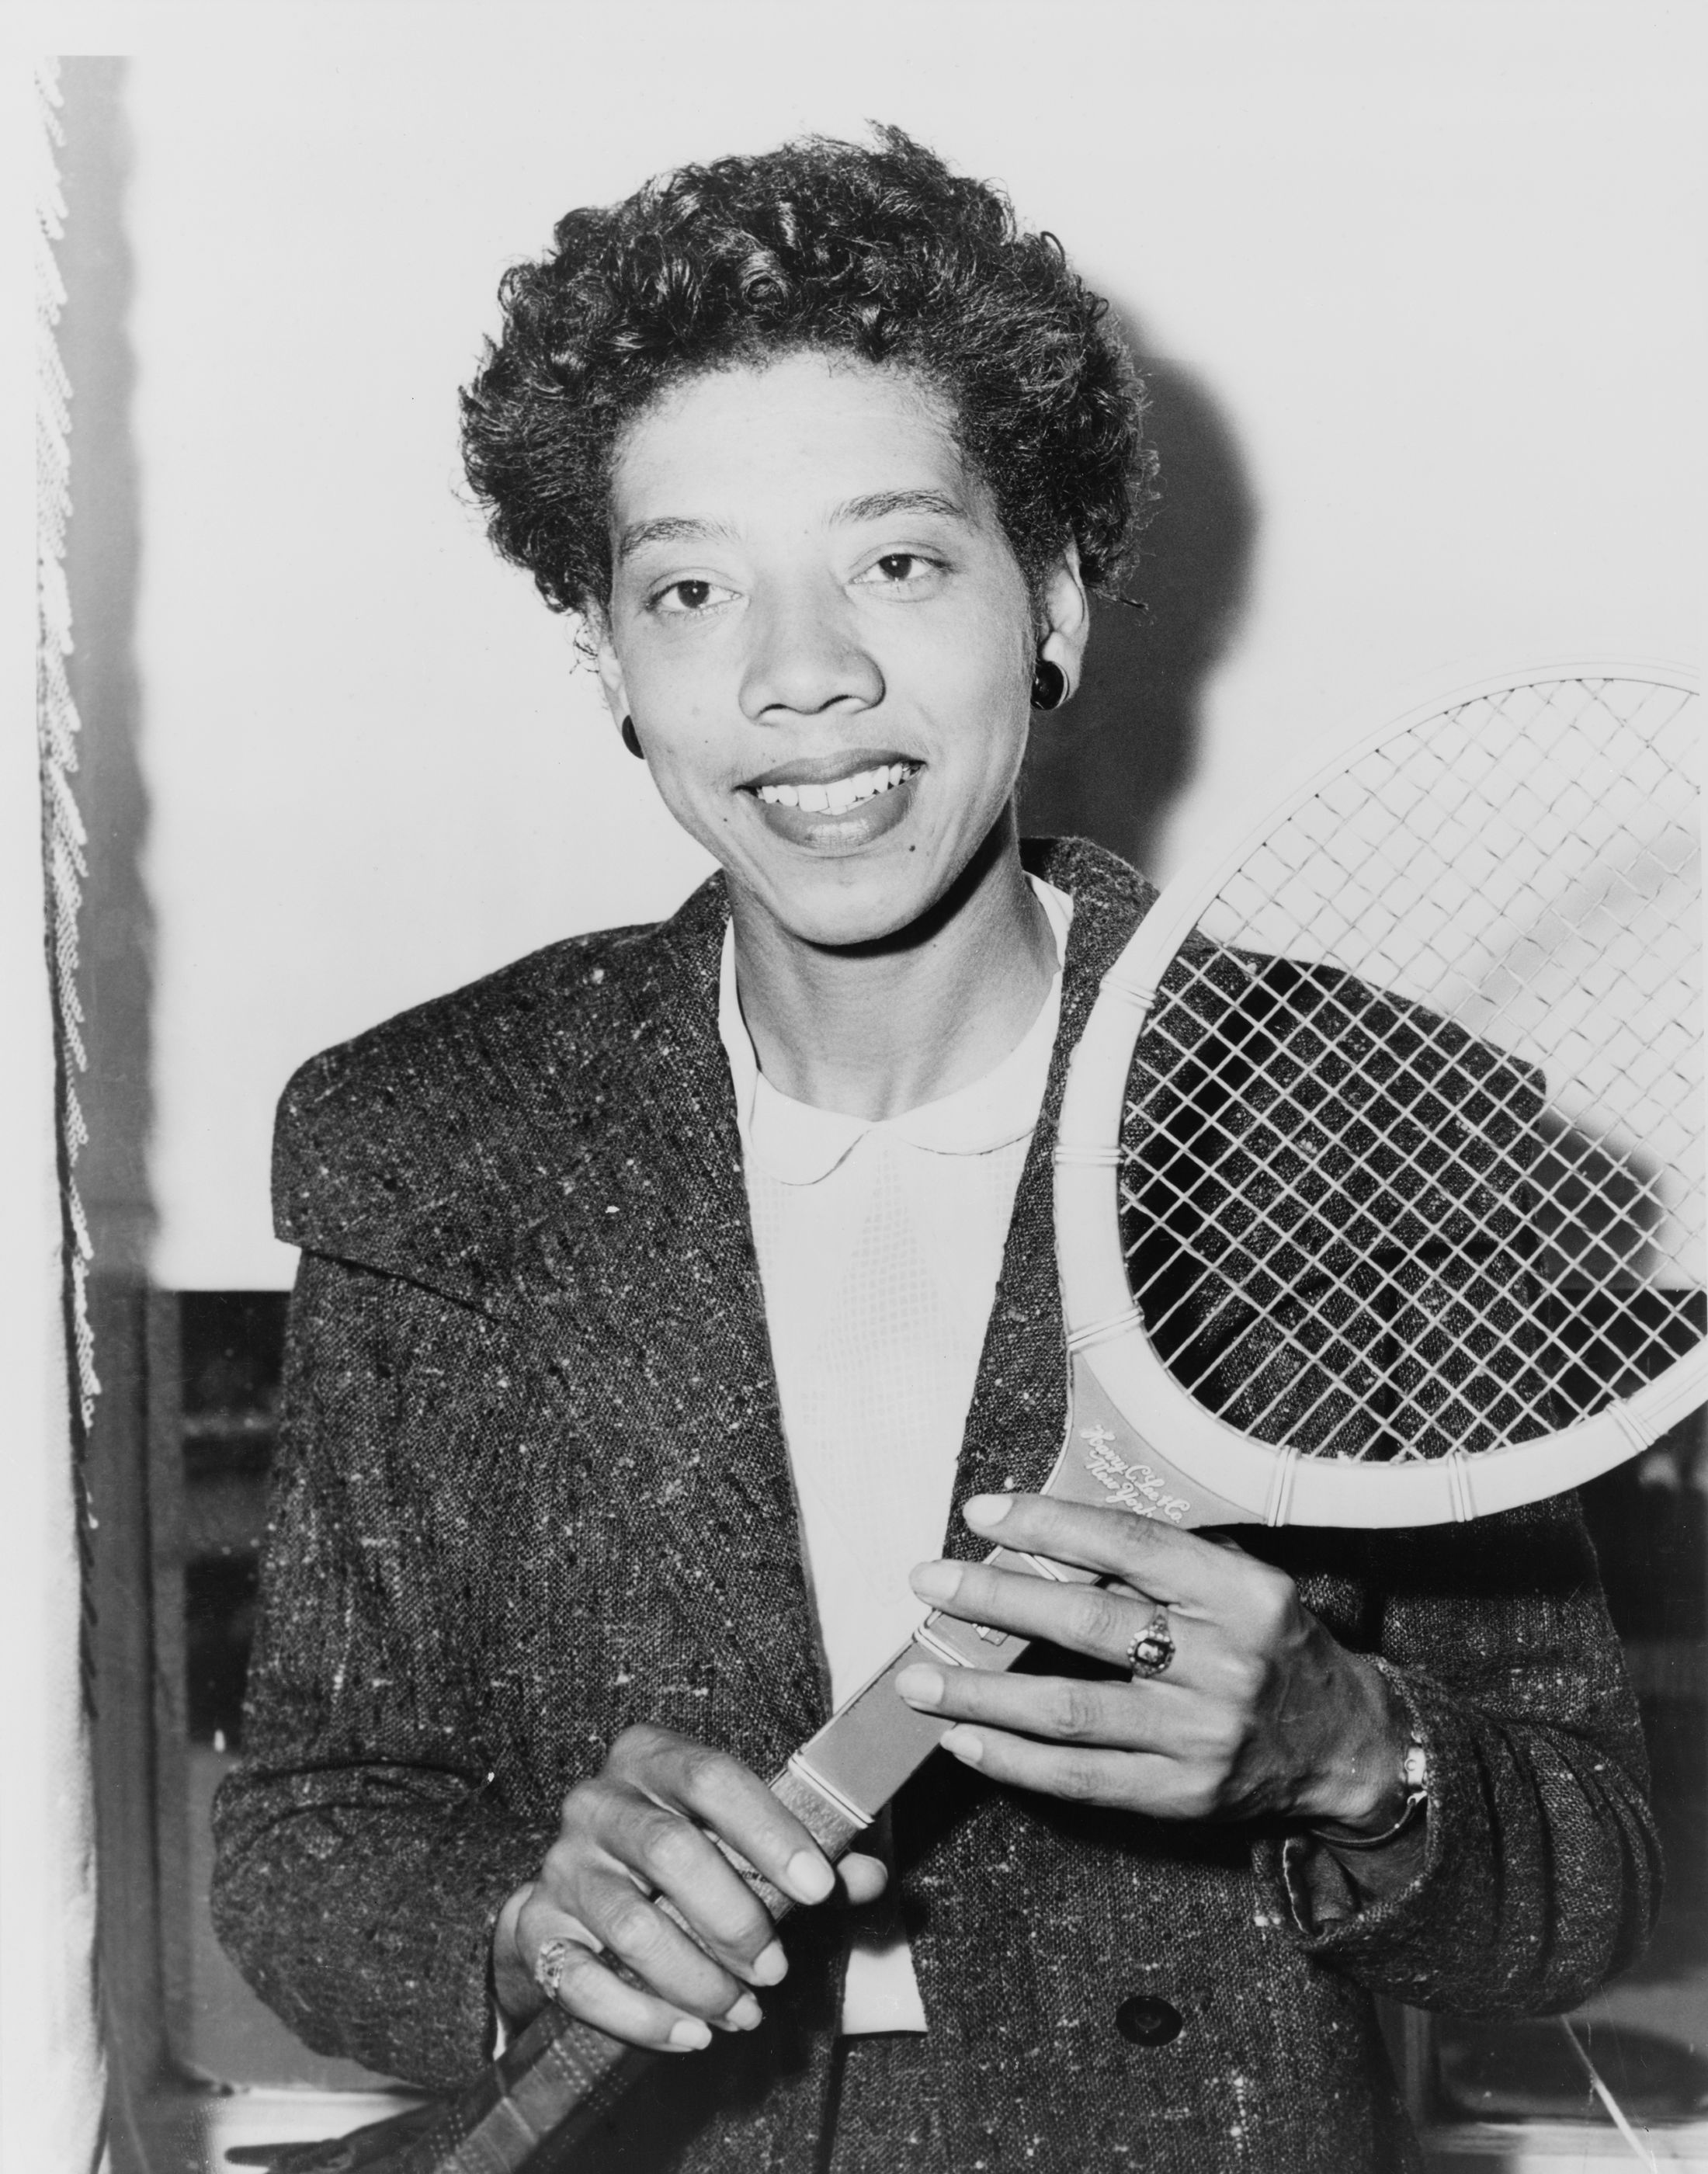 Althea Gibson, first black tennis player to win a Grand Slam title.